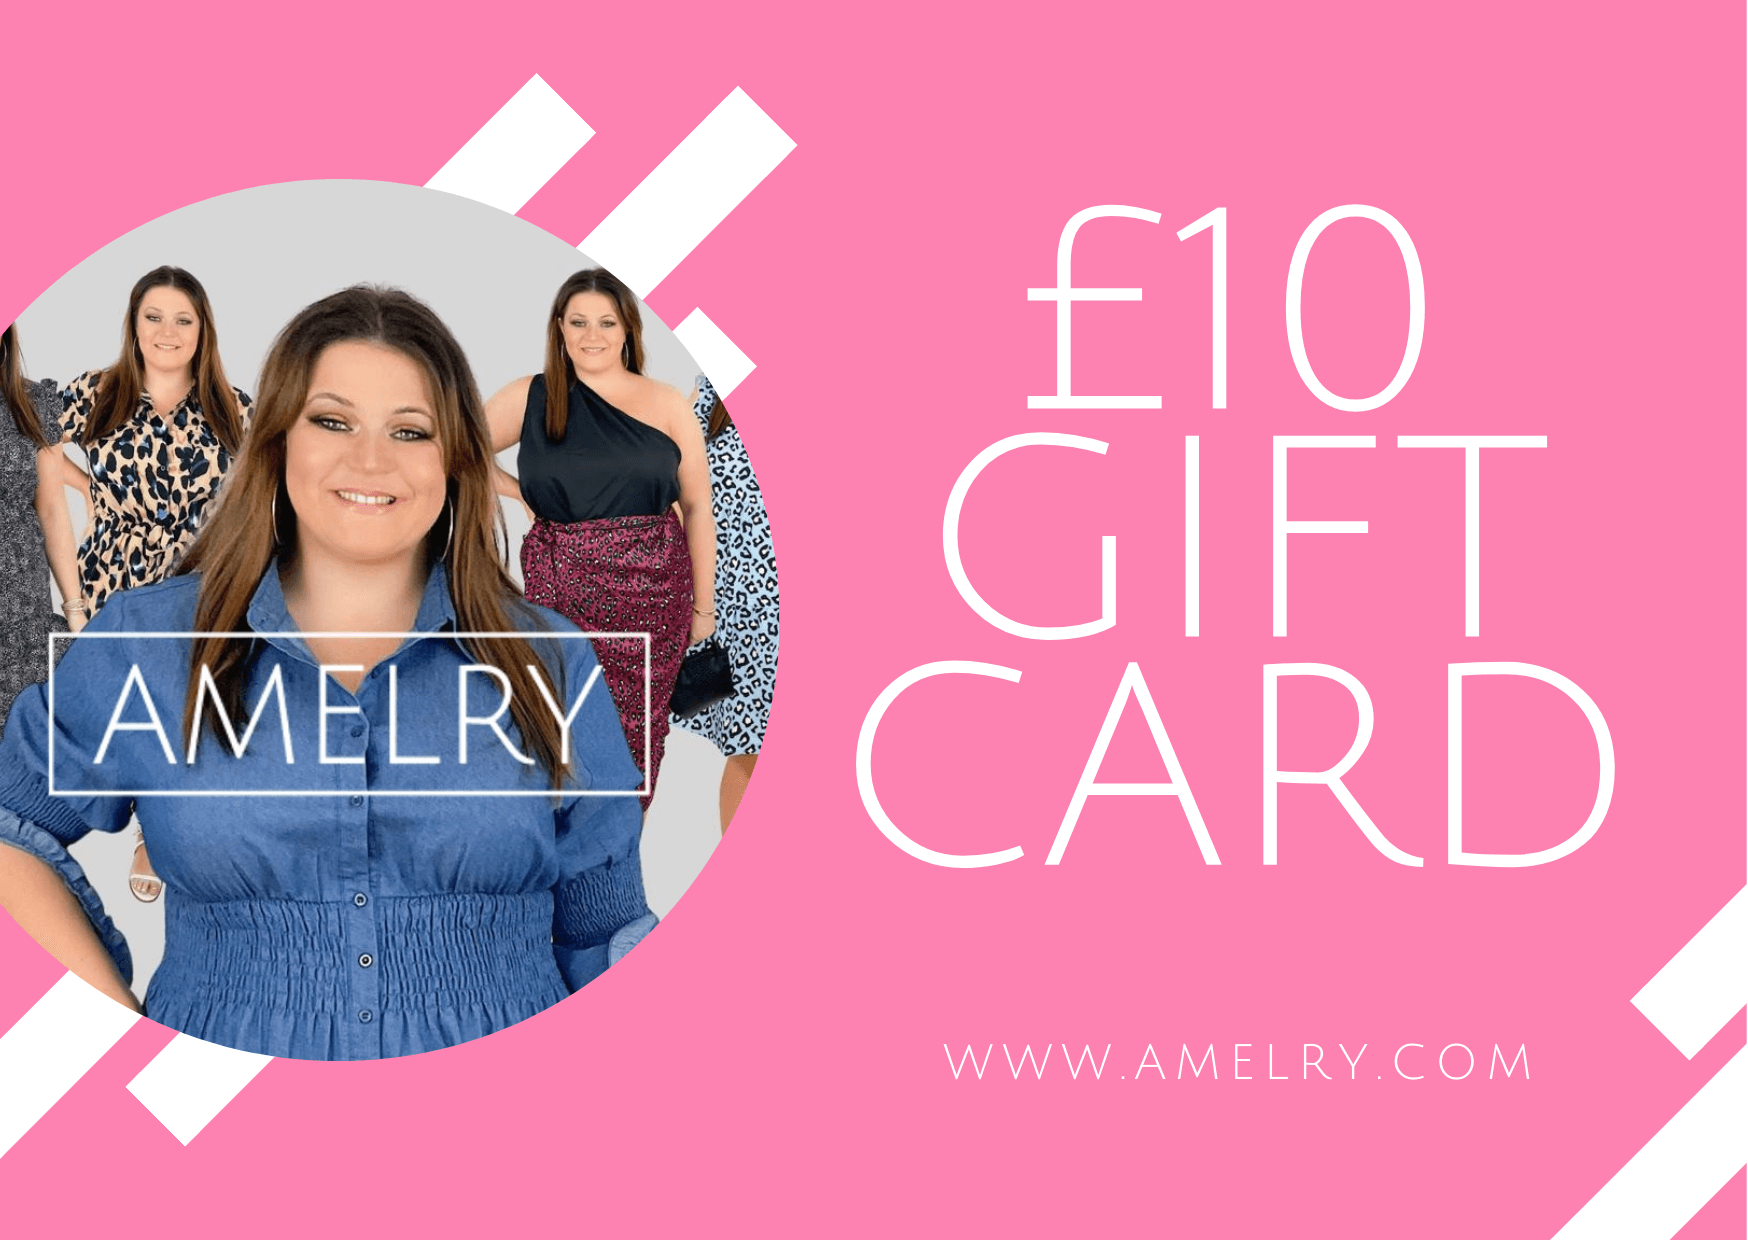 AMELRY GIFT CARD - Amelry